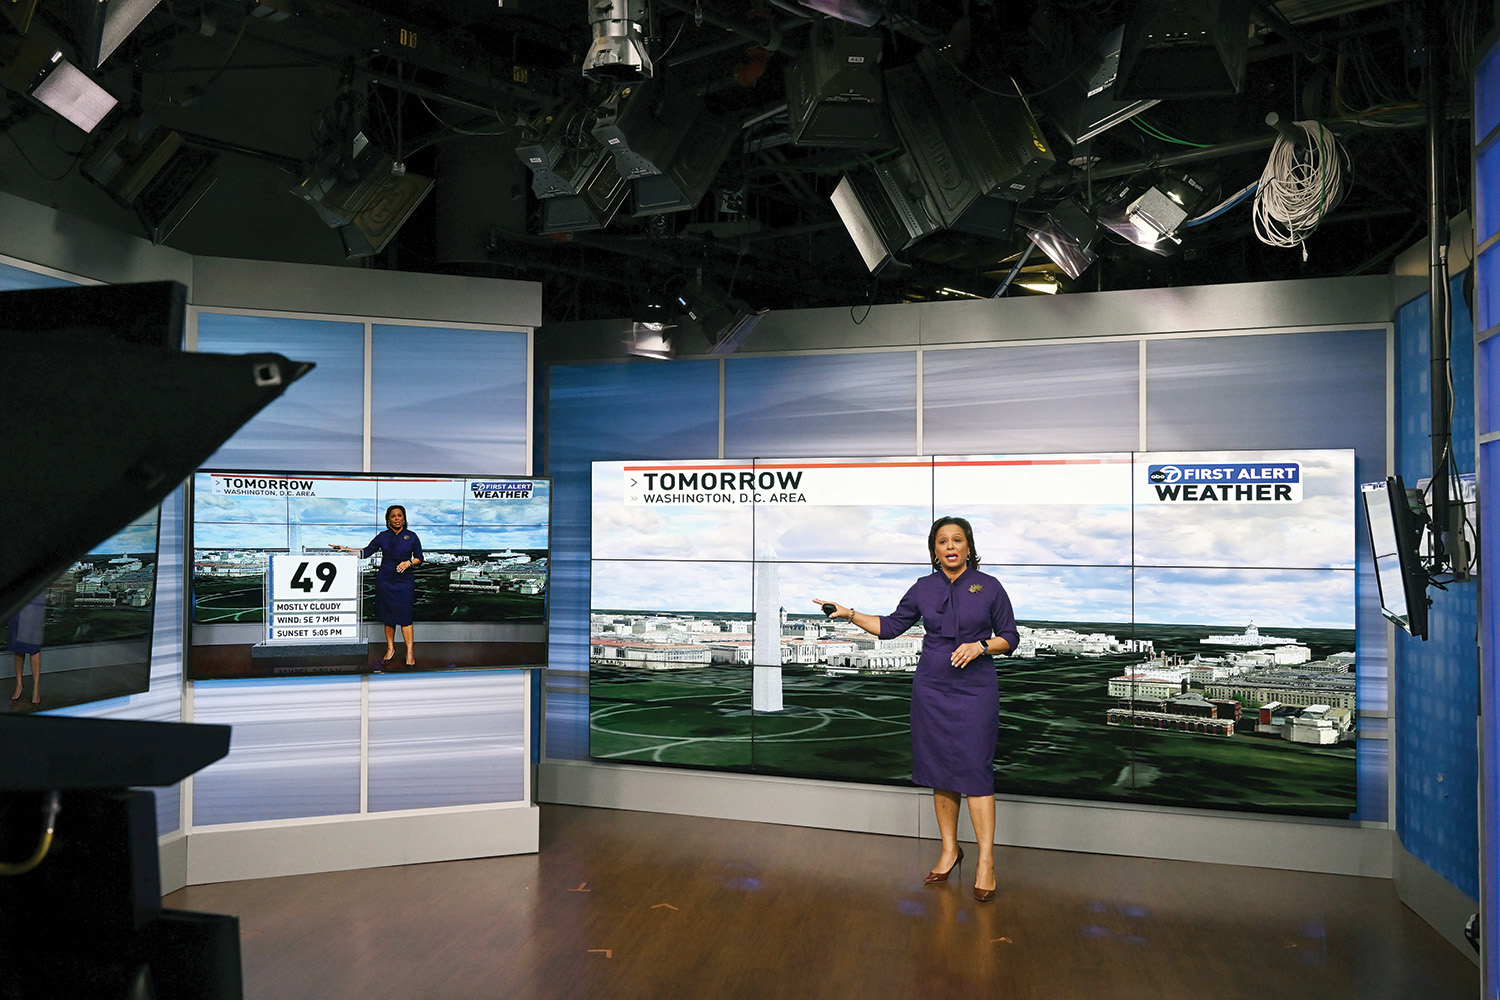 A photo of a television studio shows a camera in the foreground and a meteorologist in the background gesturing toward a monitor where a landscape view of Washington D.C. is displayed. The meteorologist has straight brown hair and brown skin, and wears a purple dress and brown heels. A smaller monitor is a few feet away, which shows a weather forecast along the bottom of the screen. The rest of the screen mirrors the image of the meteorologist.